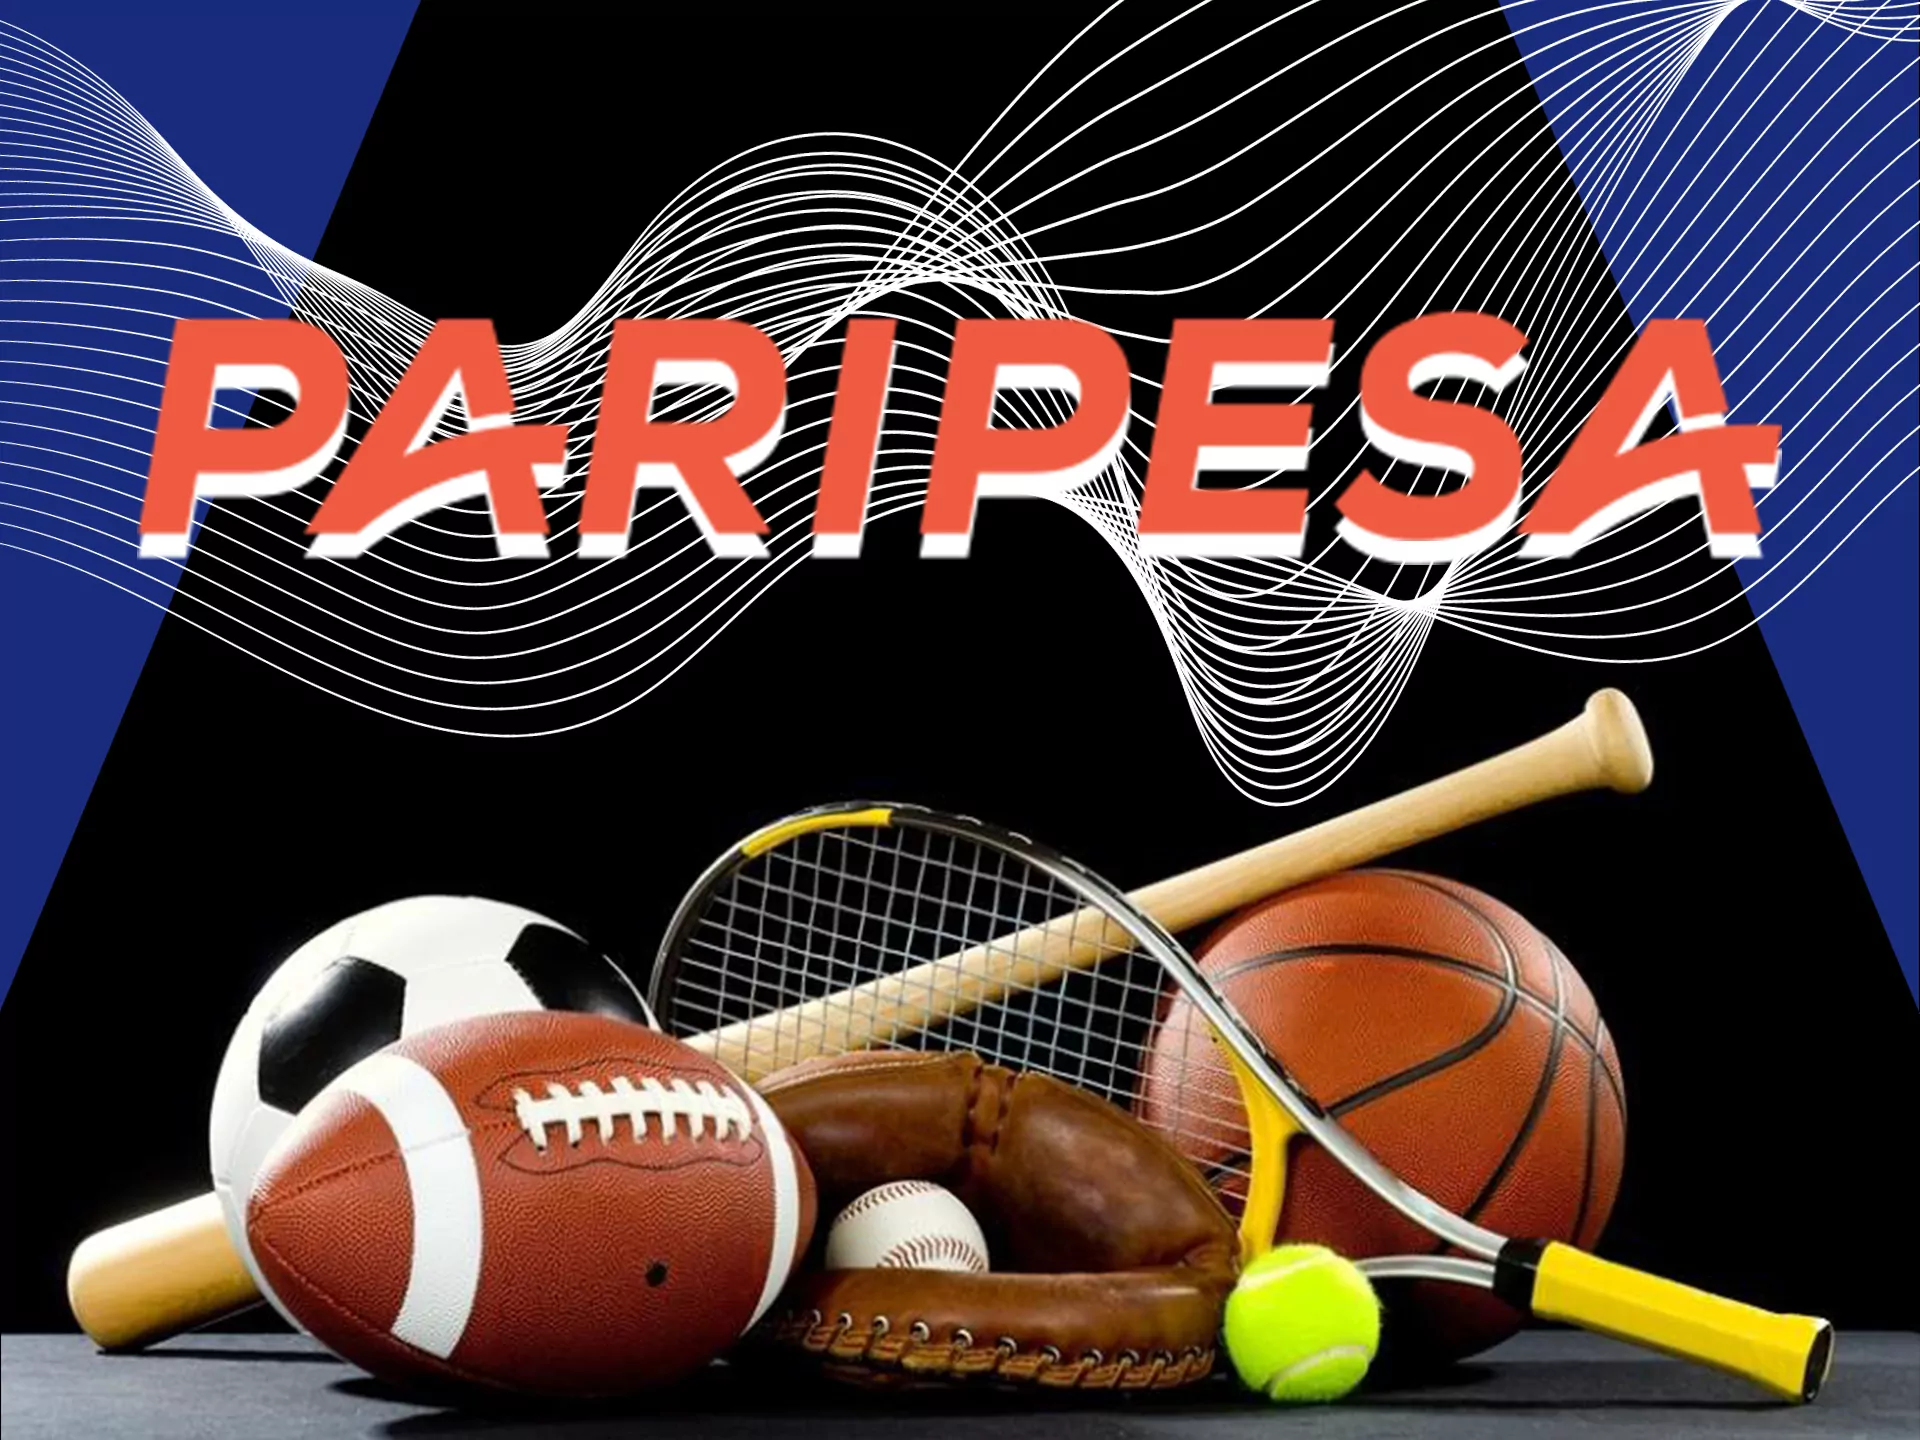 Bet on different sports at Paripesa.